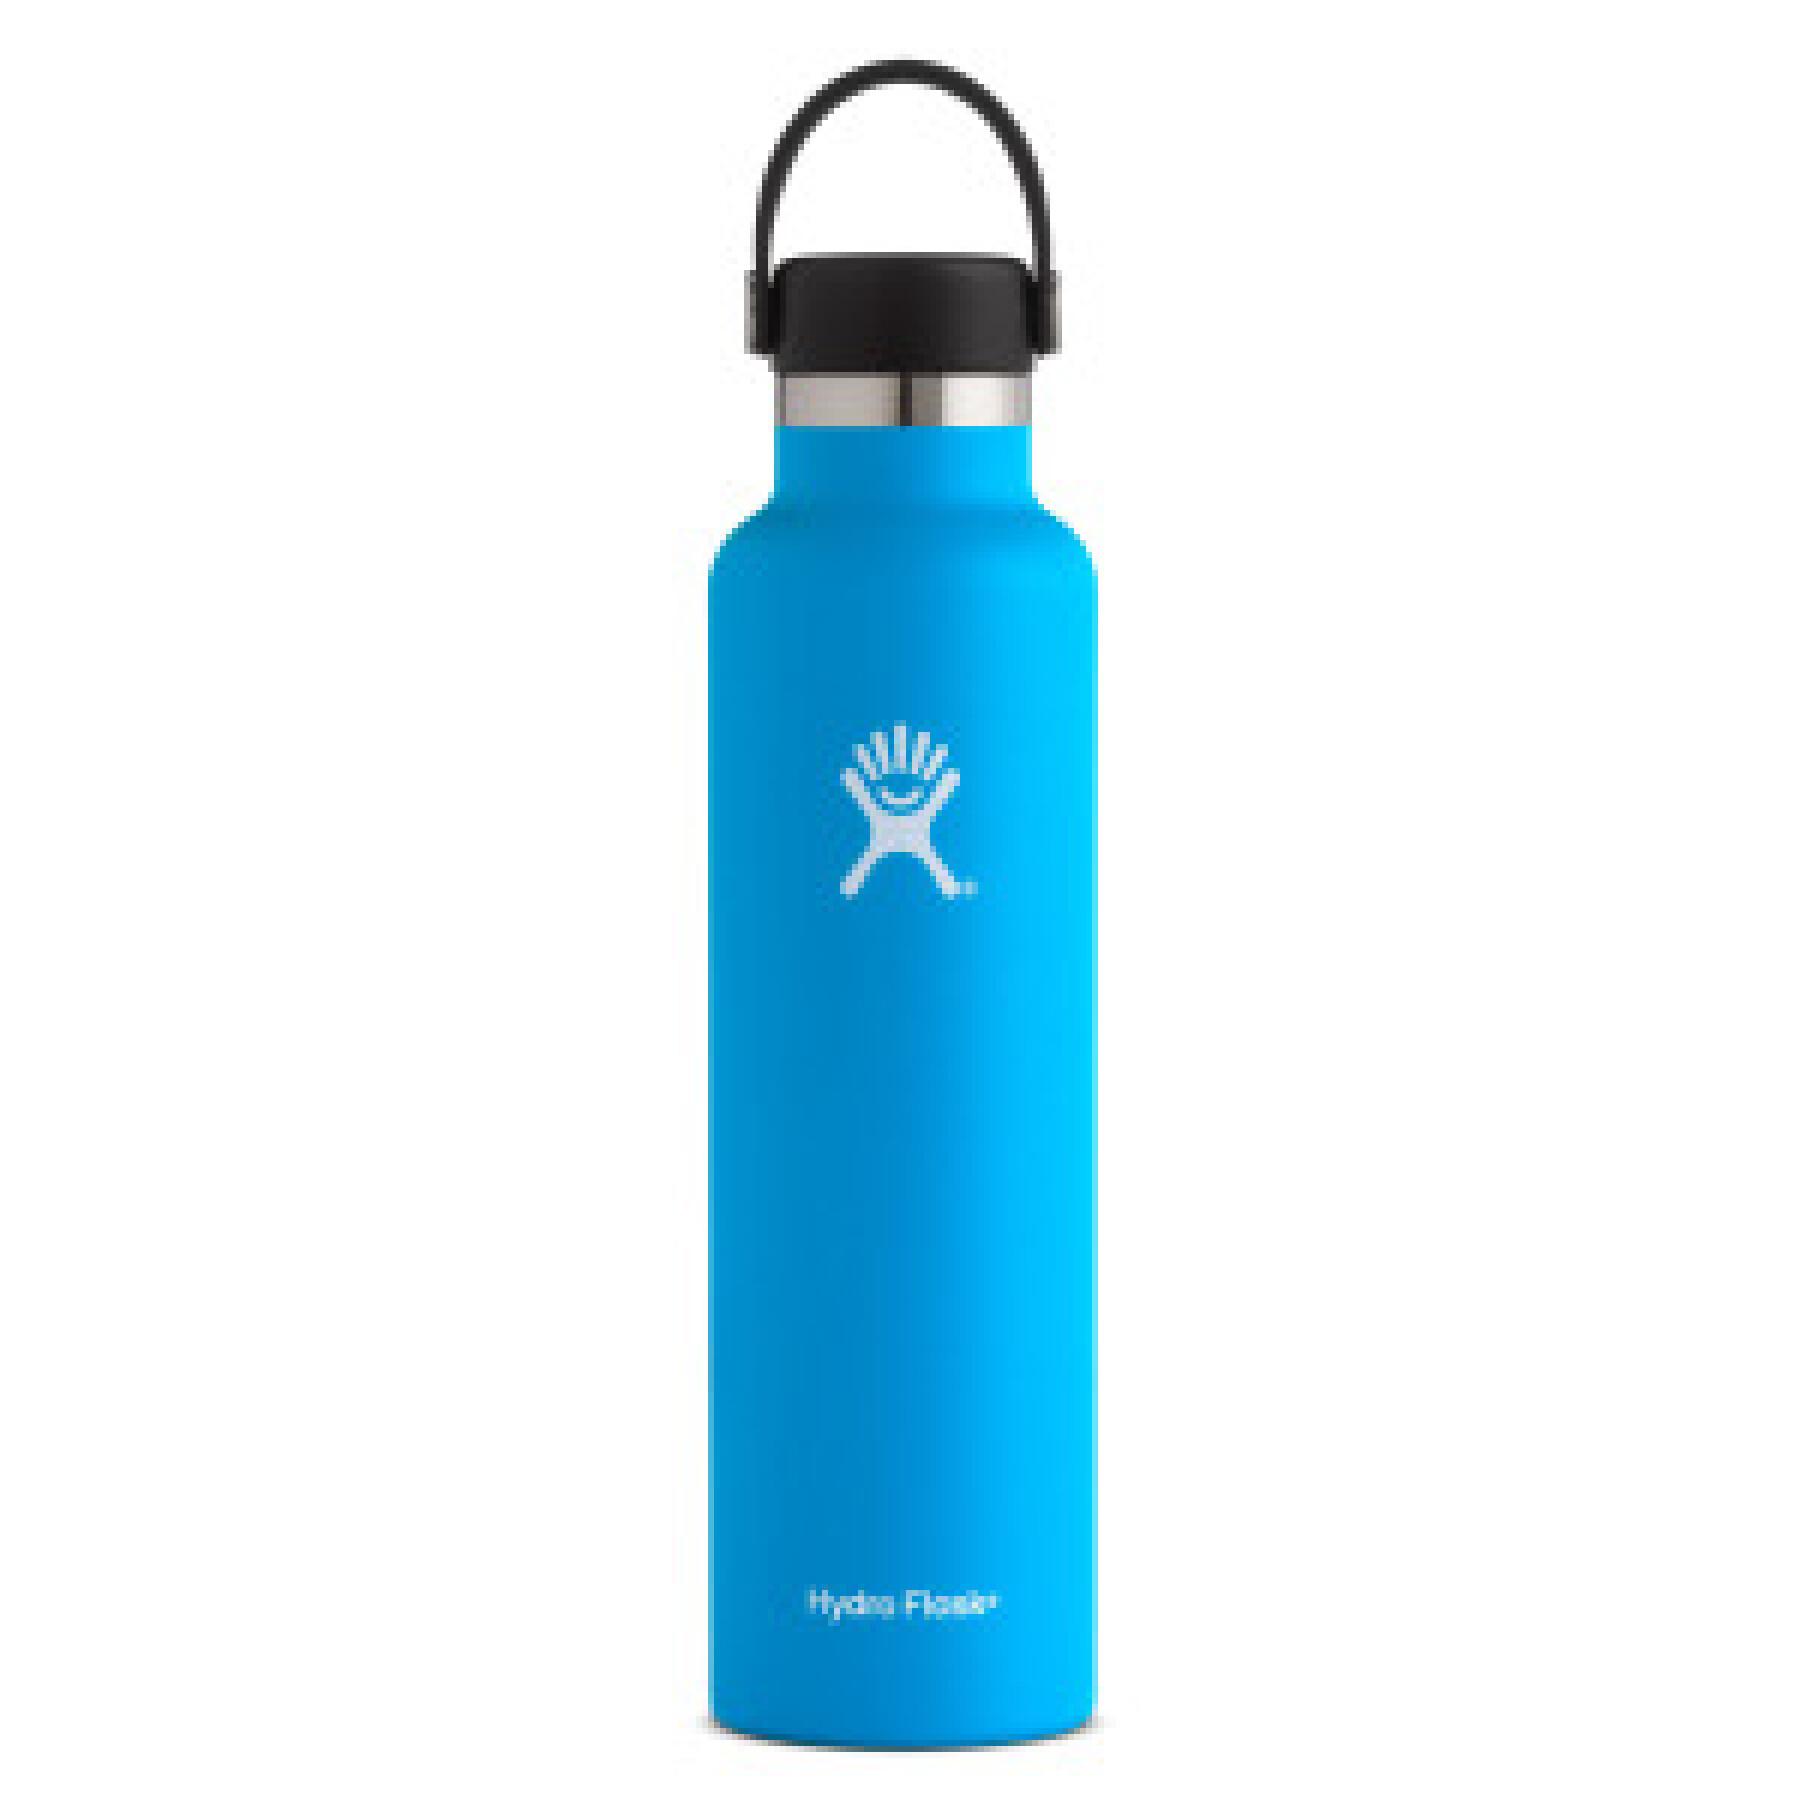 Standaard thermosfles Hydro Flask with standard mouth flex cap 24 oz